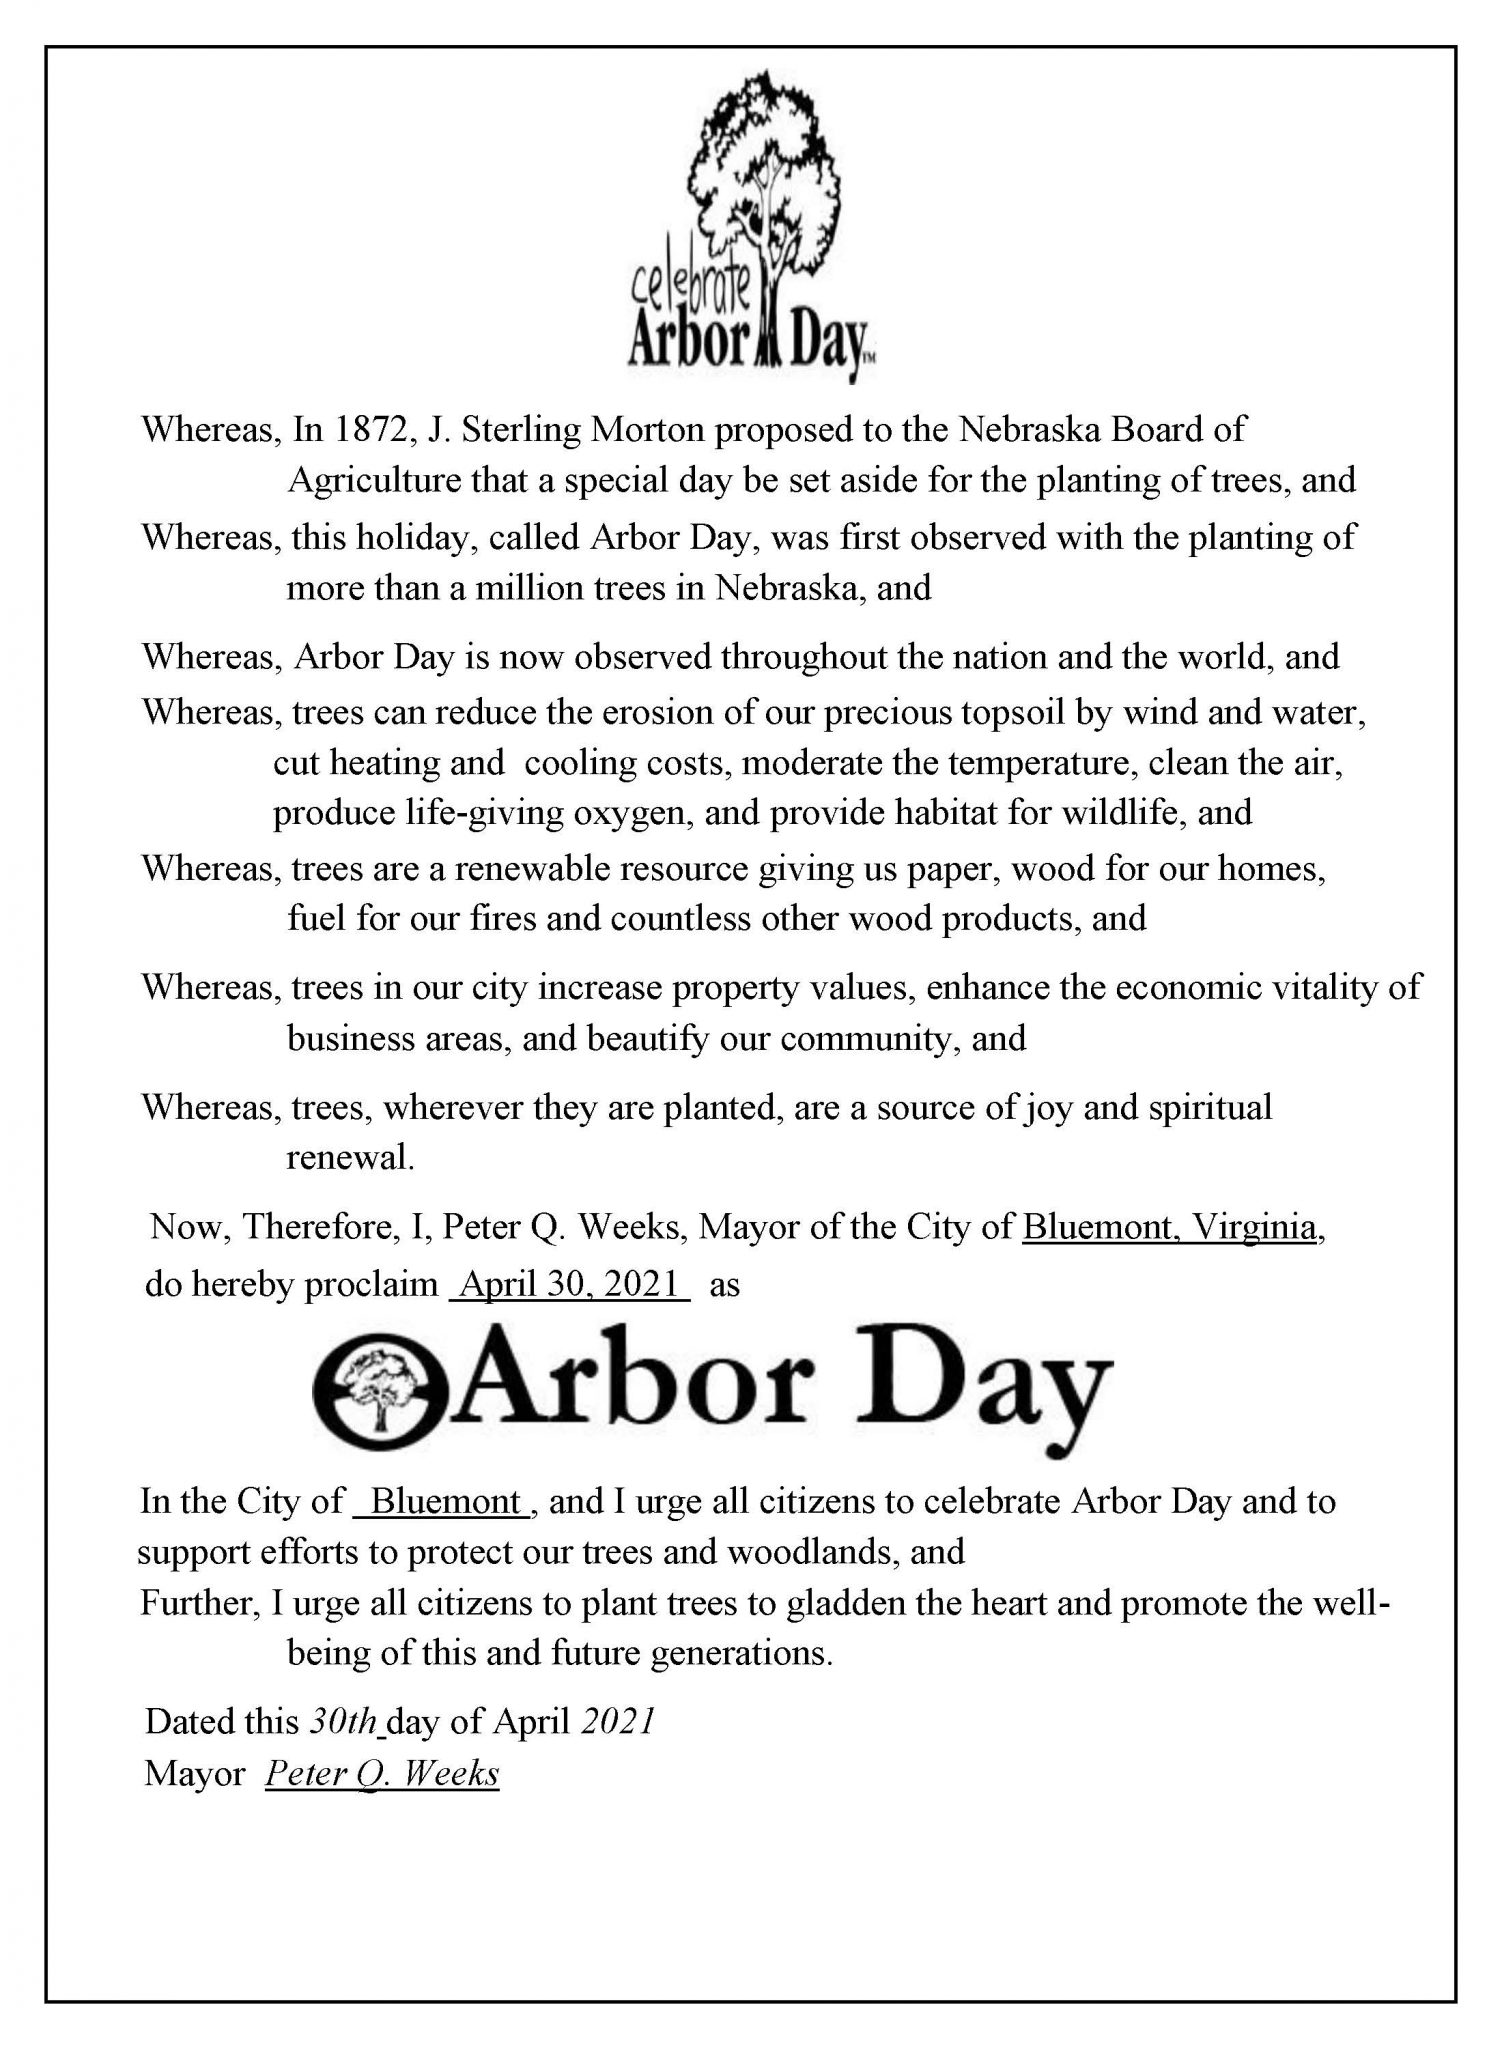 2021 Arbor Day Proclamation and Celebration Village of Bluemont, Virginia